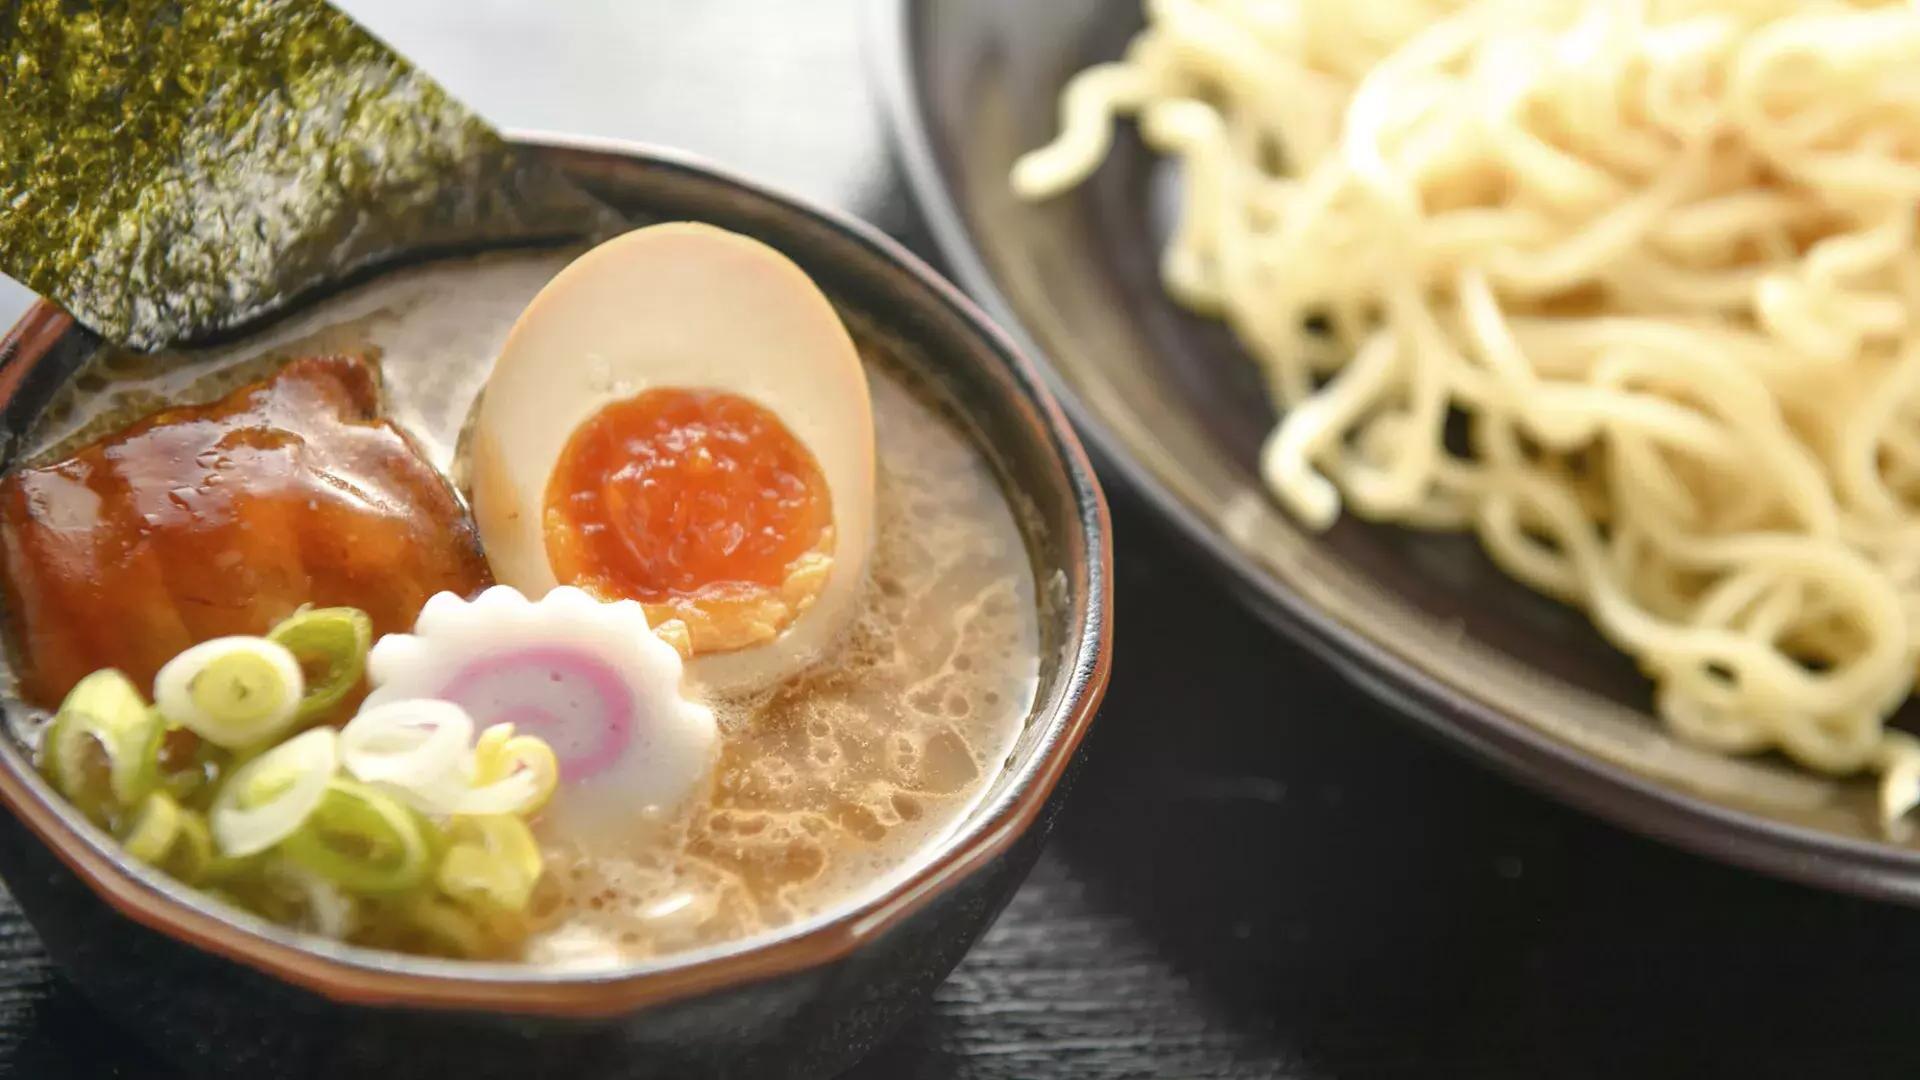 Close up shot of a bowl of noodles and a bowl of ramen soup with a poached egg, sliced in half.